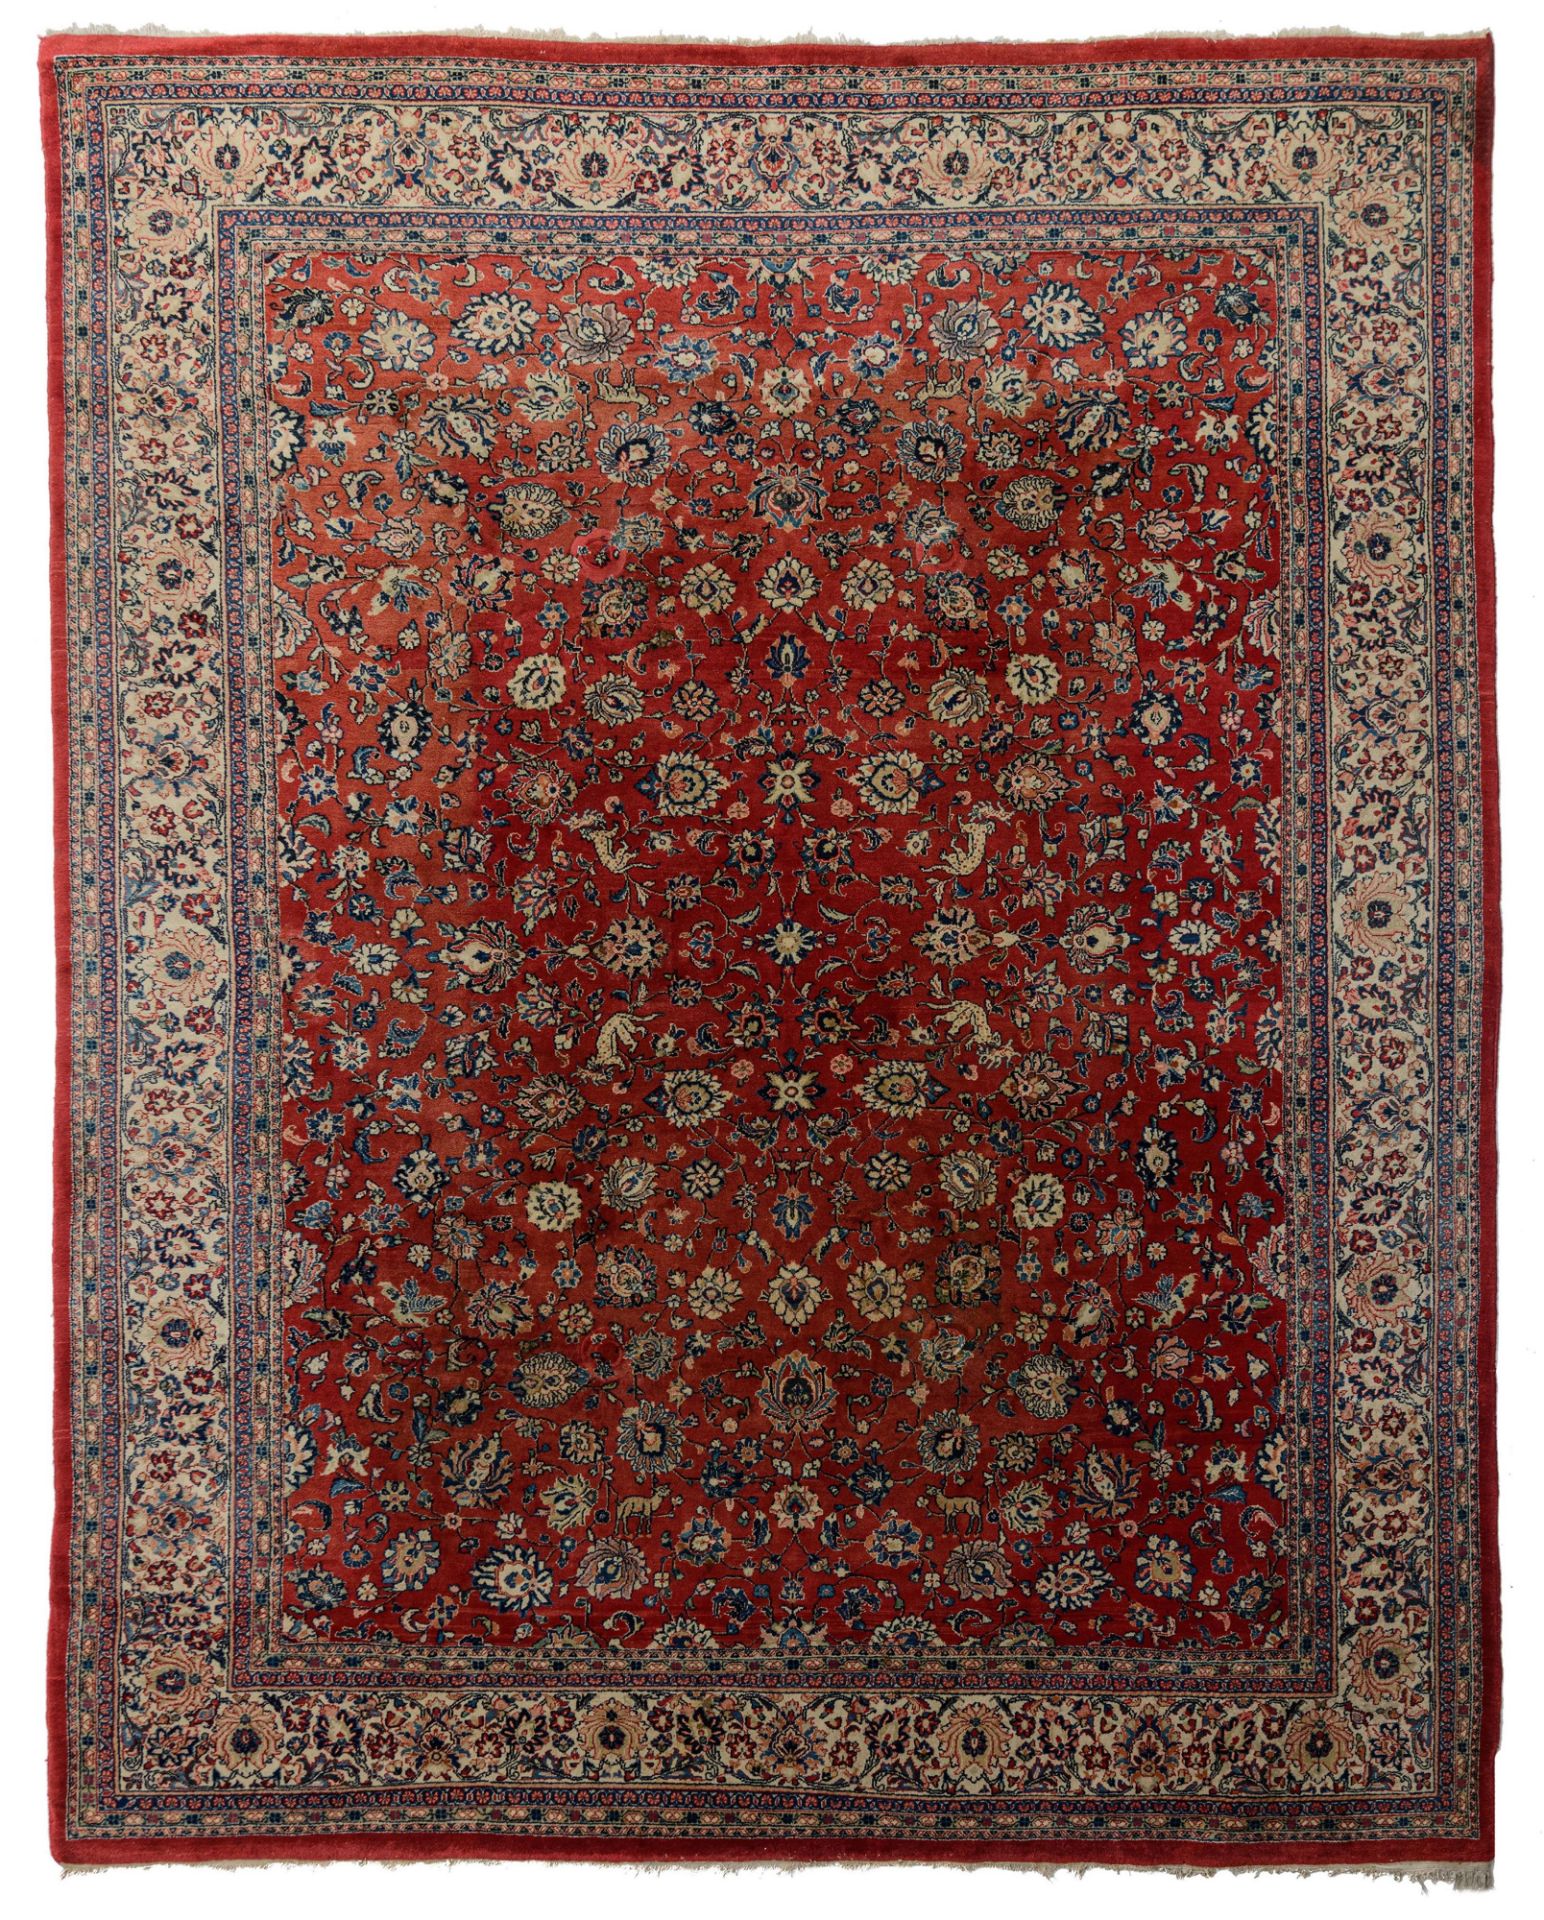 A large Oriental Sarourg carpet, floral decorated with leopards and deers, 297 cm x 378 cm